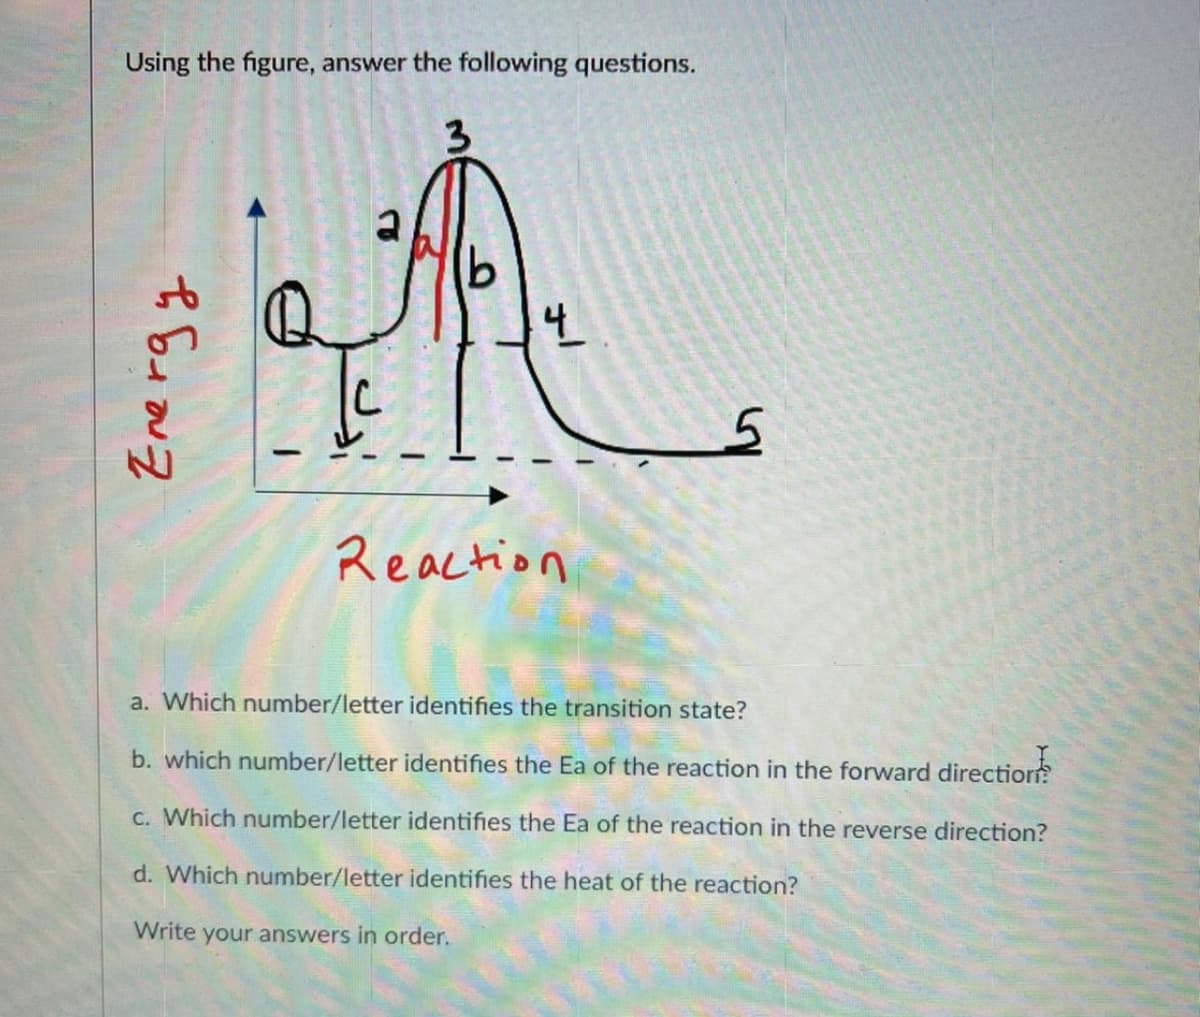 Using the figure, answer the following questions.
3
b
Re
4
Energy
Reaction
5
a. Which number/letter identifies the transition state?
b. which number/letter identifies the Ea of the reaction in the forward direction
c. Which number/letter identifies the Ea of the reaction in the reverse direction?
d. Which number/letter identifies the heat of the reaction?
Write your answers in order.